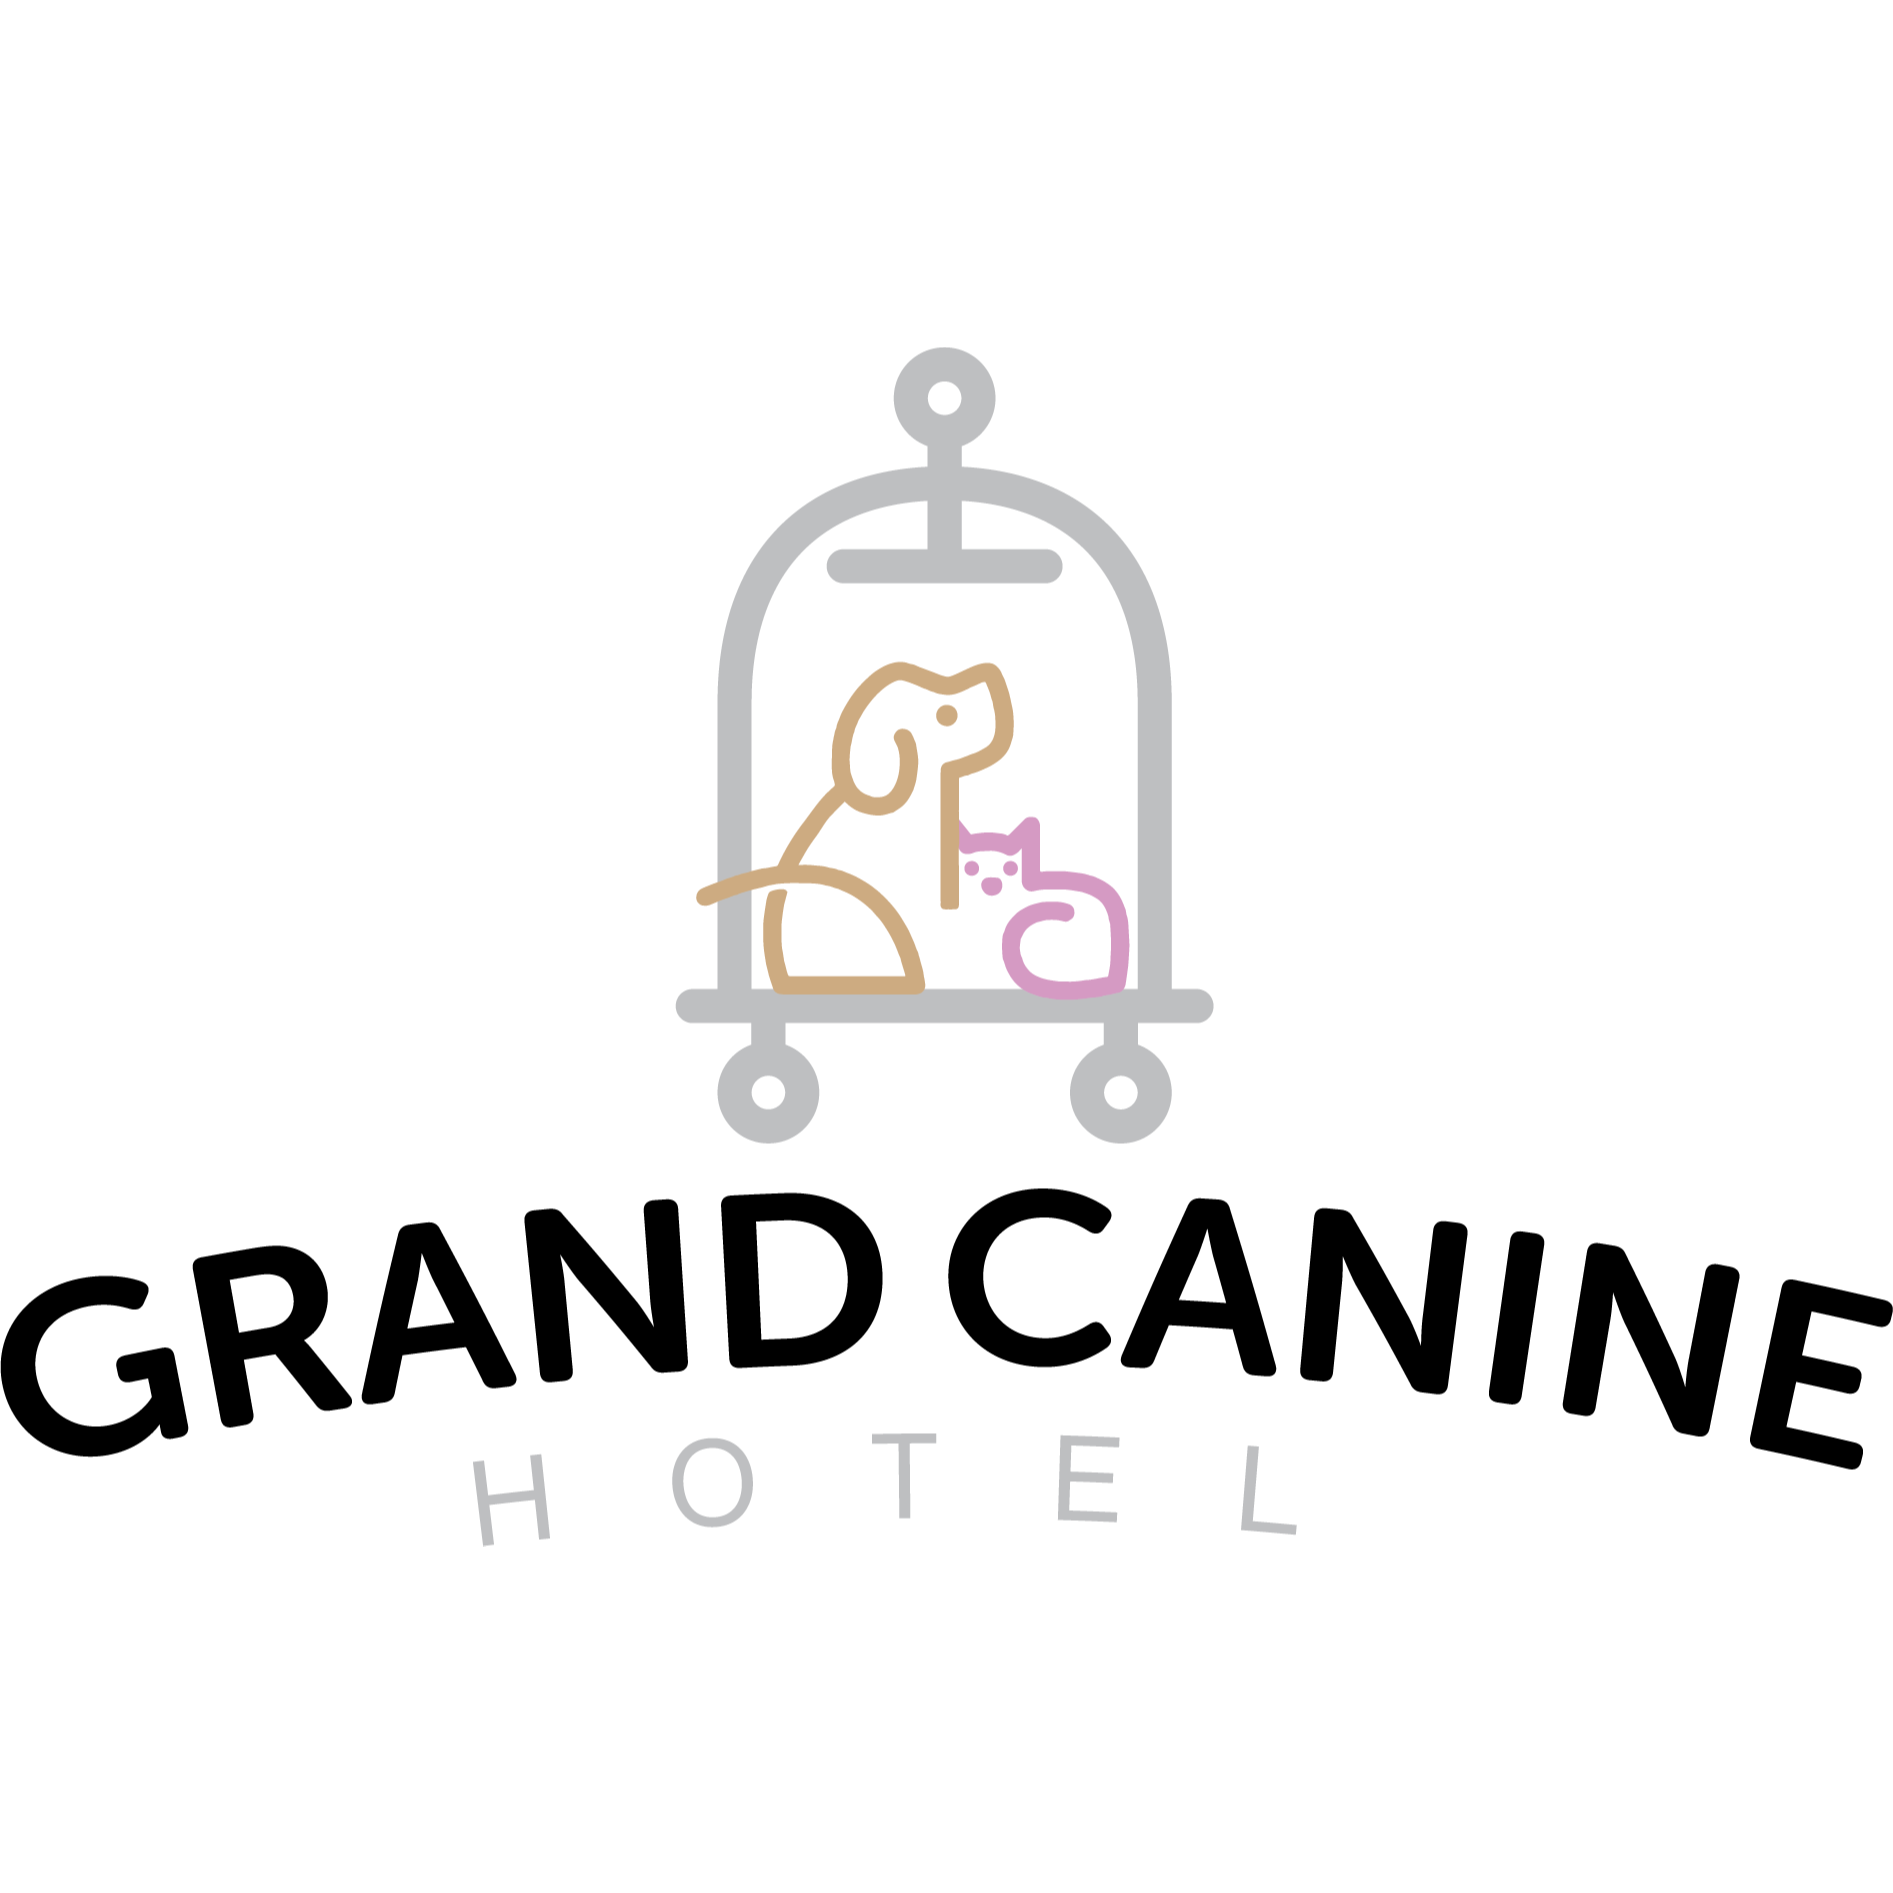 Grand Canine Hotel Indianapolis (317)983-1440